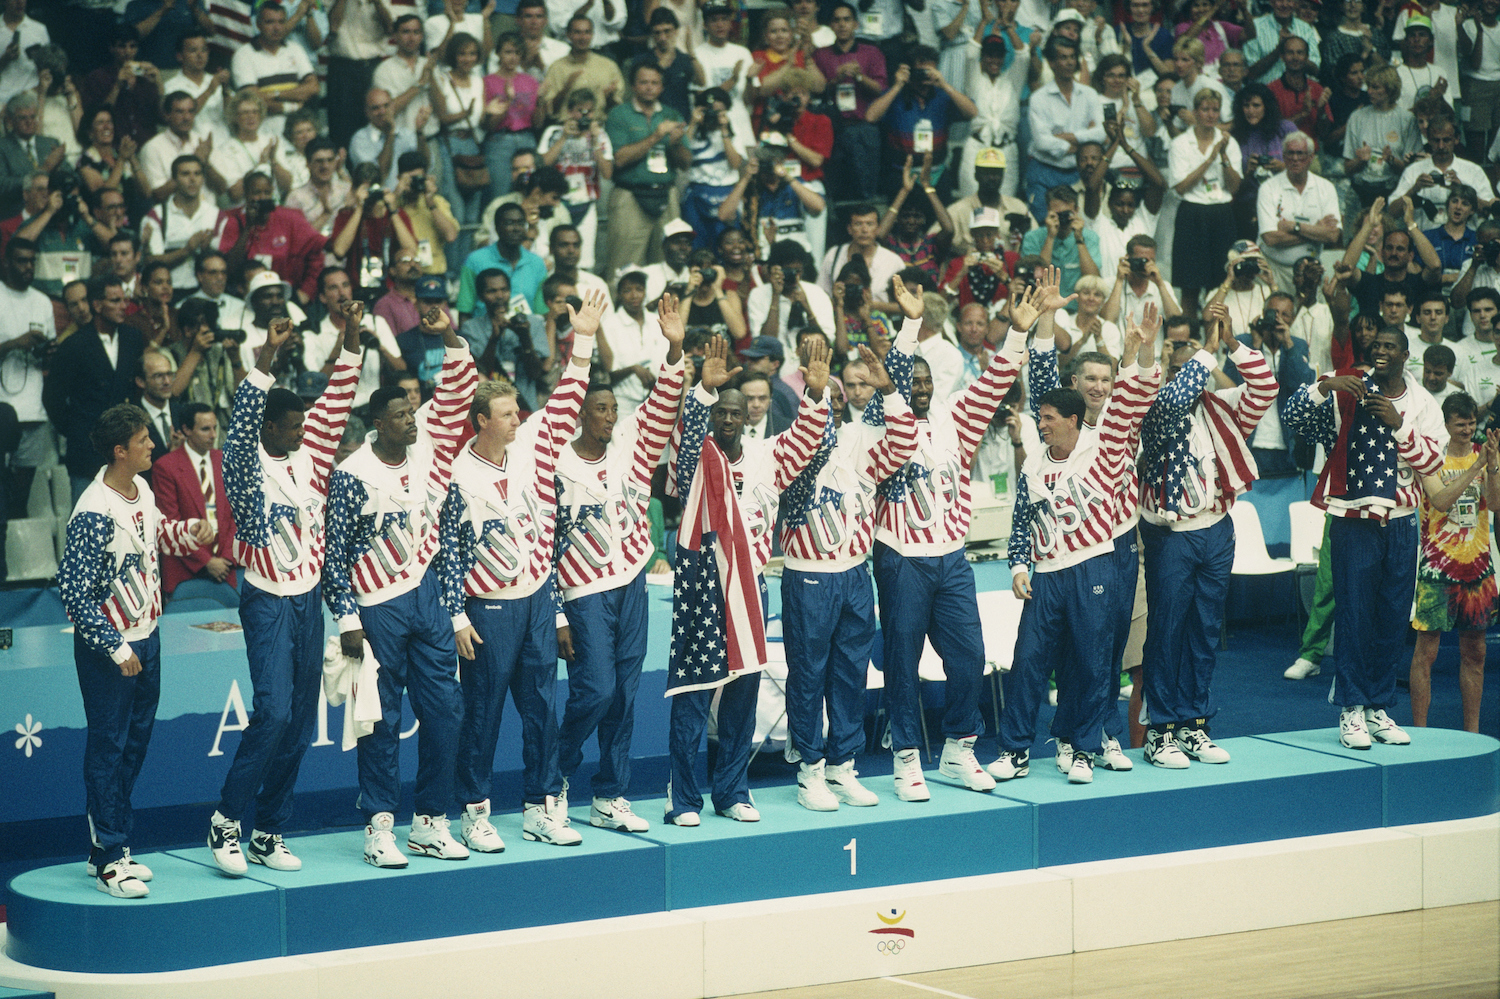 Larry Bird and the Dream Team receive gold medals at the 1992 Summer Olympics in Barcelona.